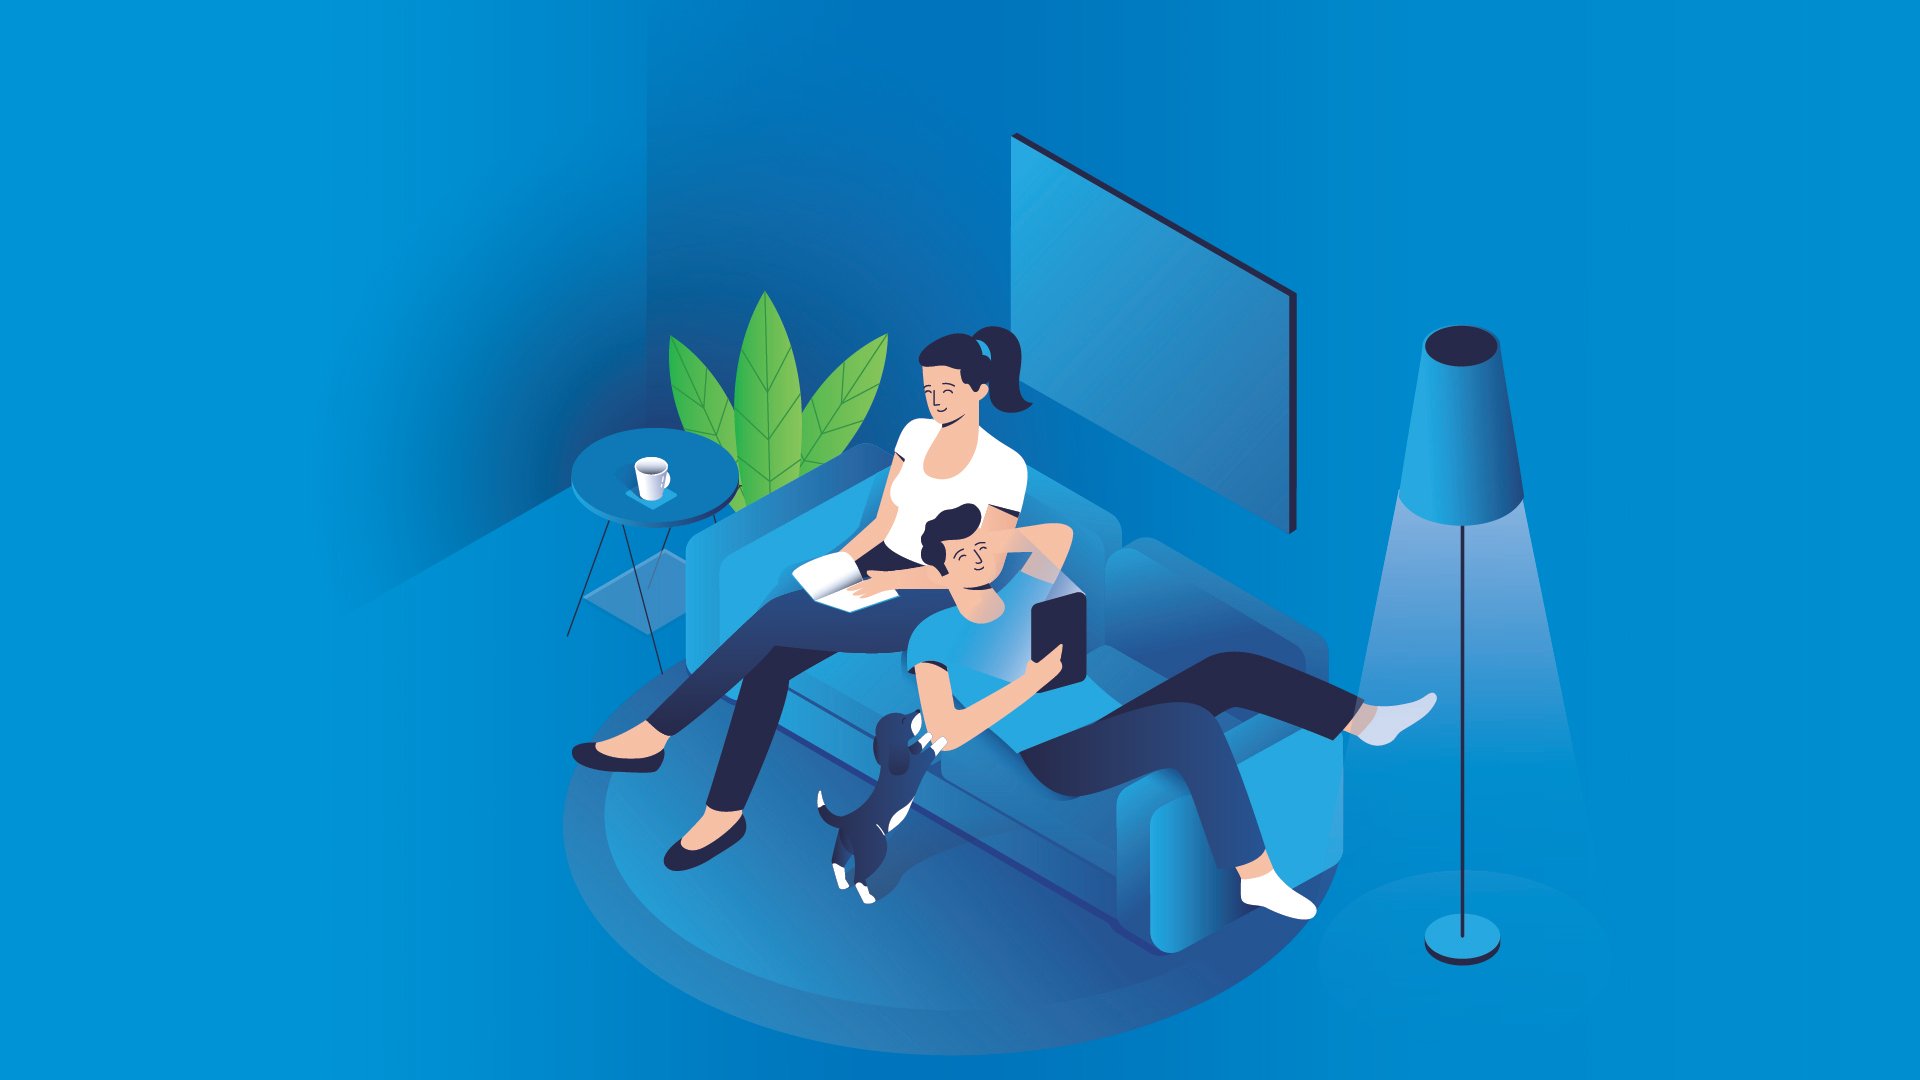 Illustration of man and woman sitting on a blue living room, as the key visual of the new Vechro Smaltoplast packaging